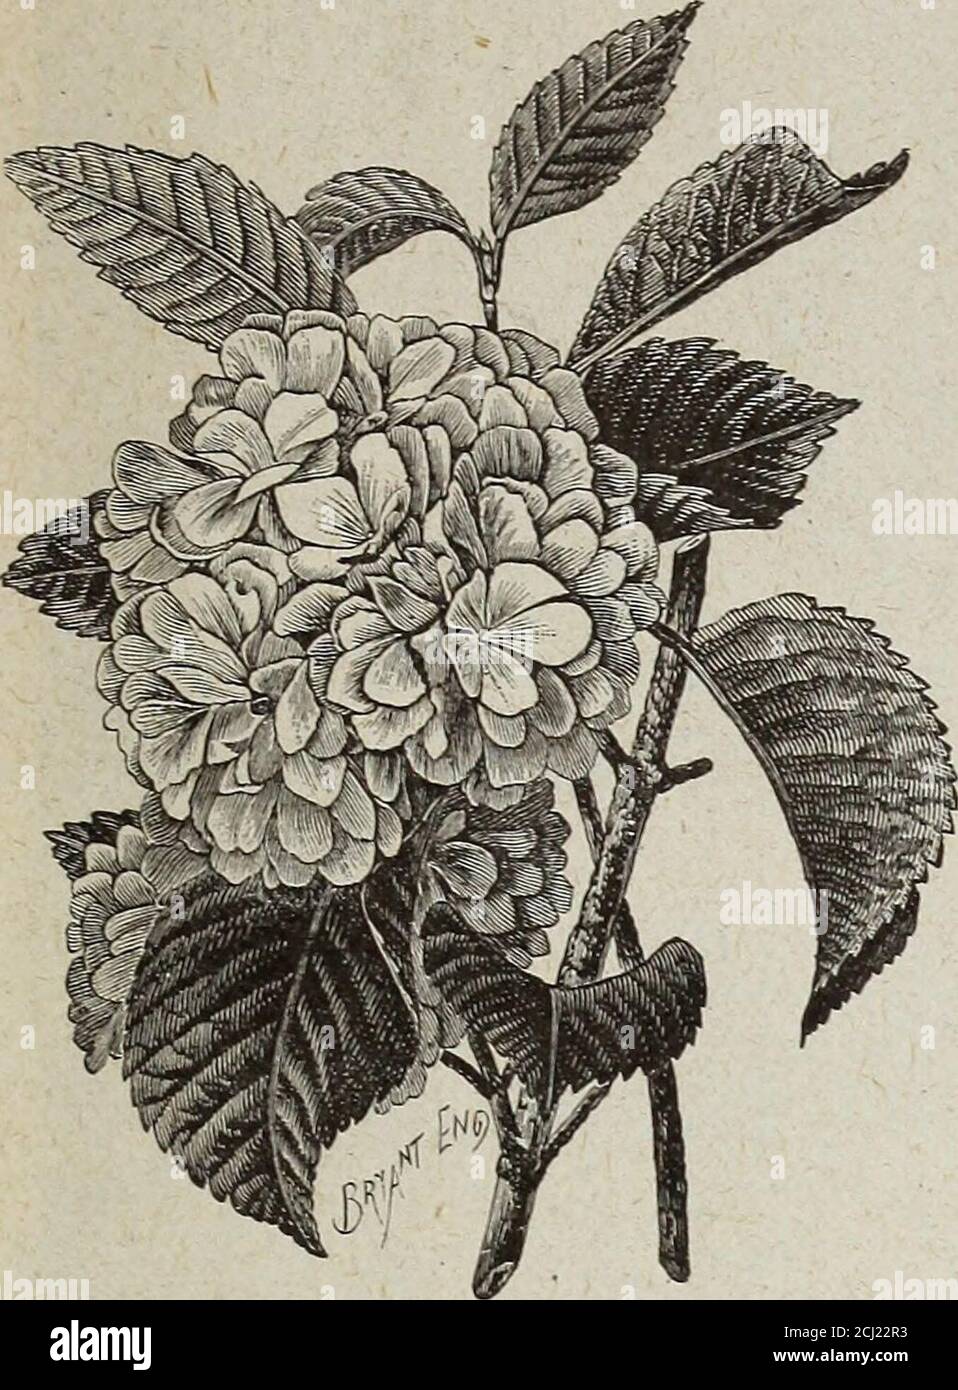 . Horsford's descriptive catalogue of hardy ornamentals herbaceous plants bulbs ferns shrubs and vines . 25 cts. each, two for 40 cts.Paul Neyron. Flowers very large, clear, deep rose, very double and full. 25 cts. each, two for 40 c. Climbing Roses. Baltimore Belle. Flowers large, compact and fine ; of a pale blush color. Very double and in clusters. 25 cts. each, two for 40 cts.Russells Cottage. Flowers dark crimson ; very double and full. A great bloomer. 25 cts. each,. two for 40 cts. Anne Maria. Flowers double, in clusters ; rosy carmine, shaded pink. 25 cts. each, two for 40 cts. Tea Ros Stock Photo